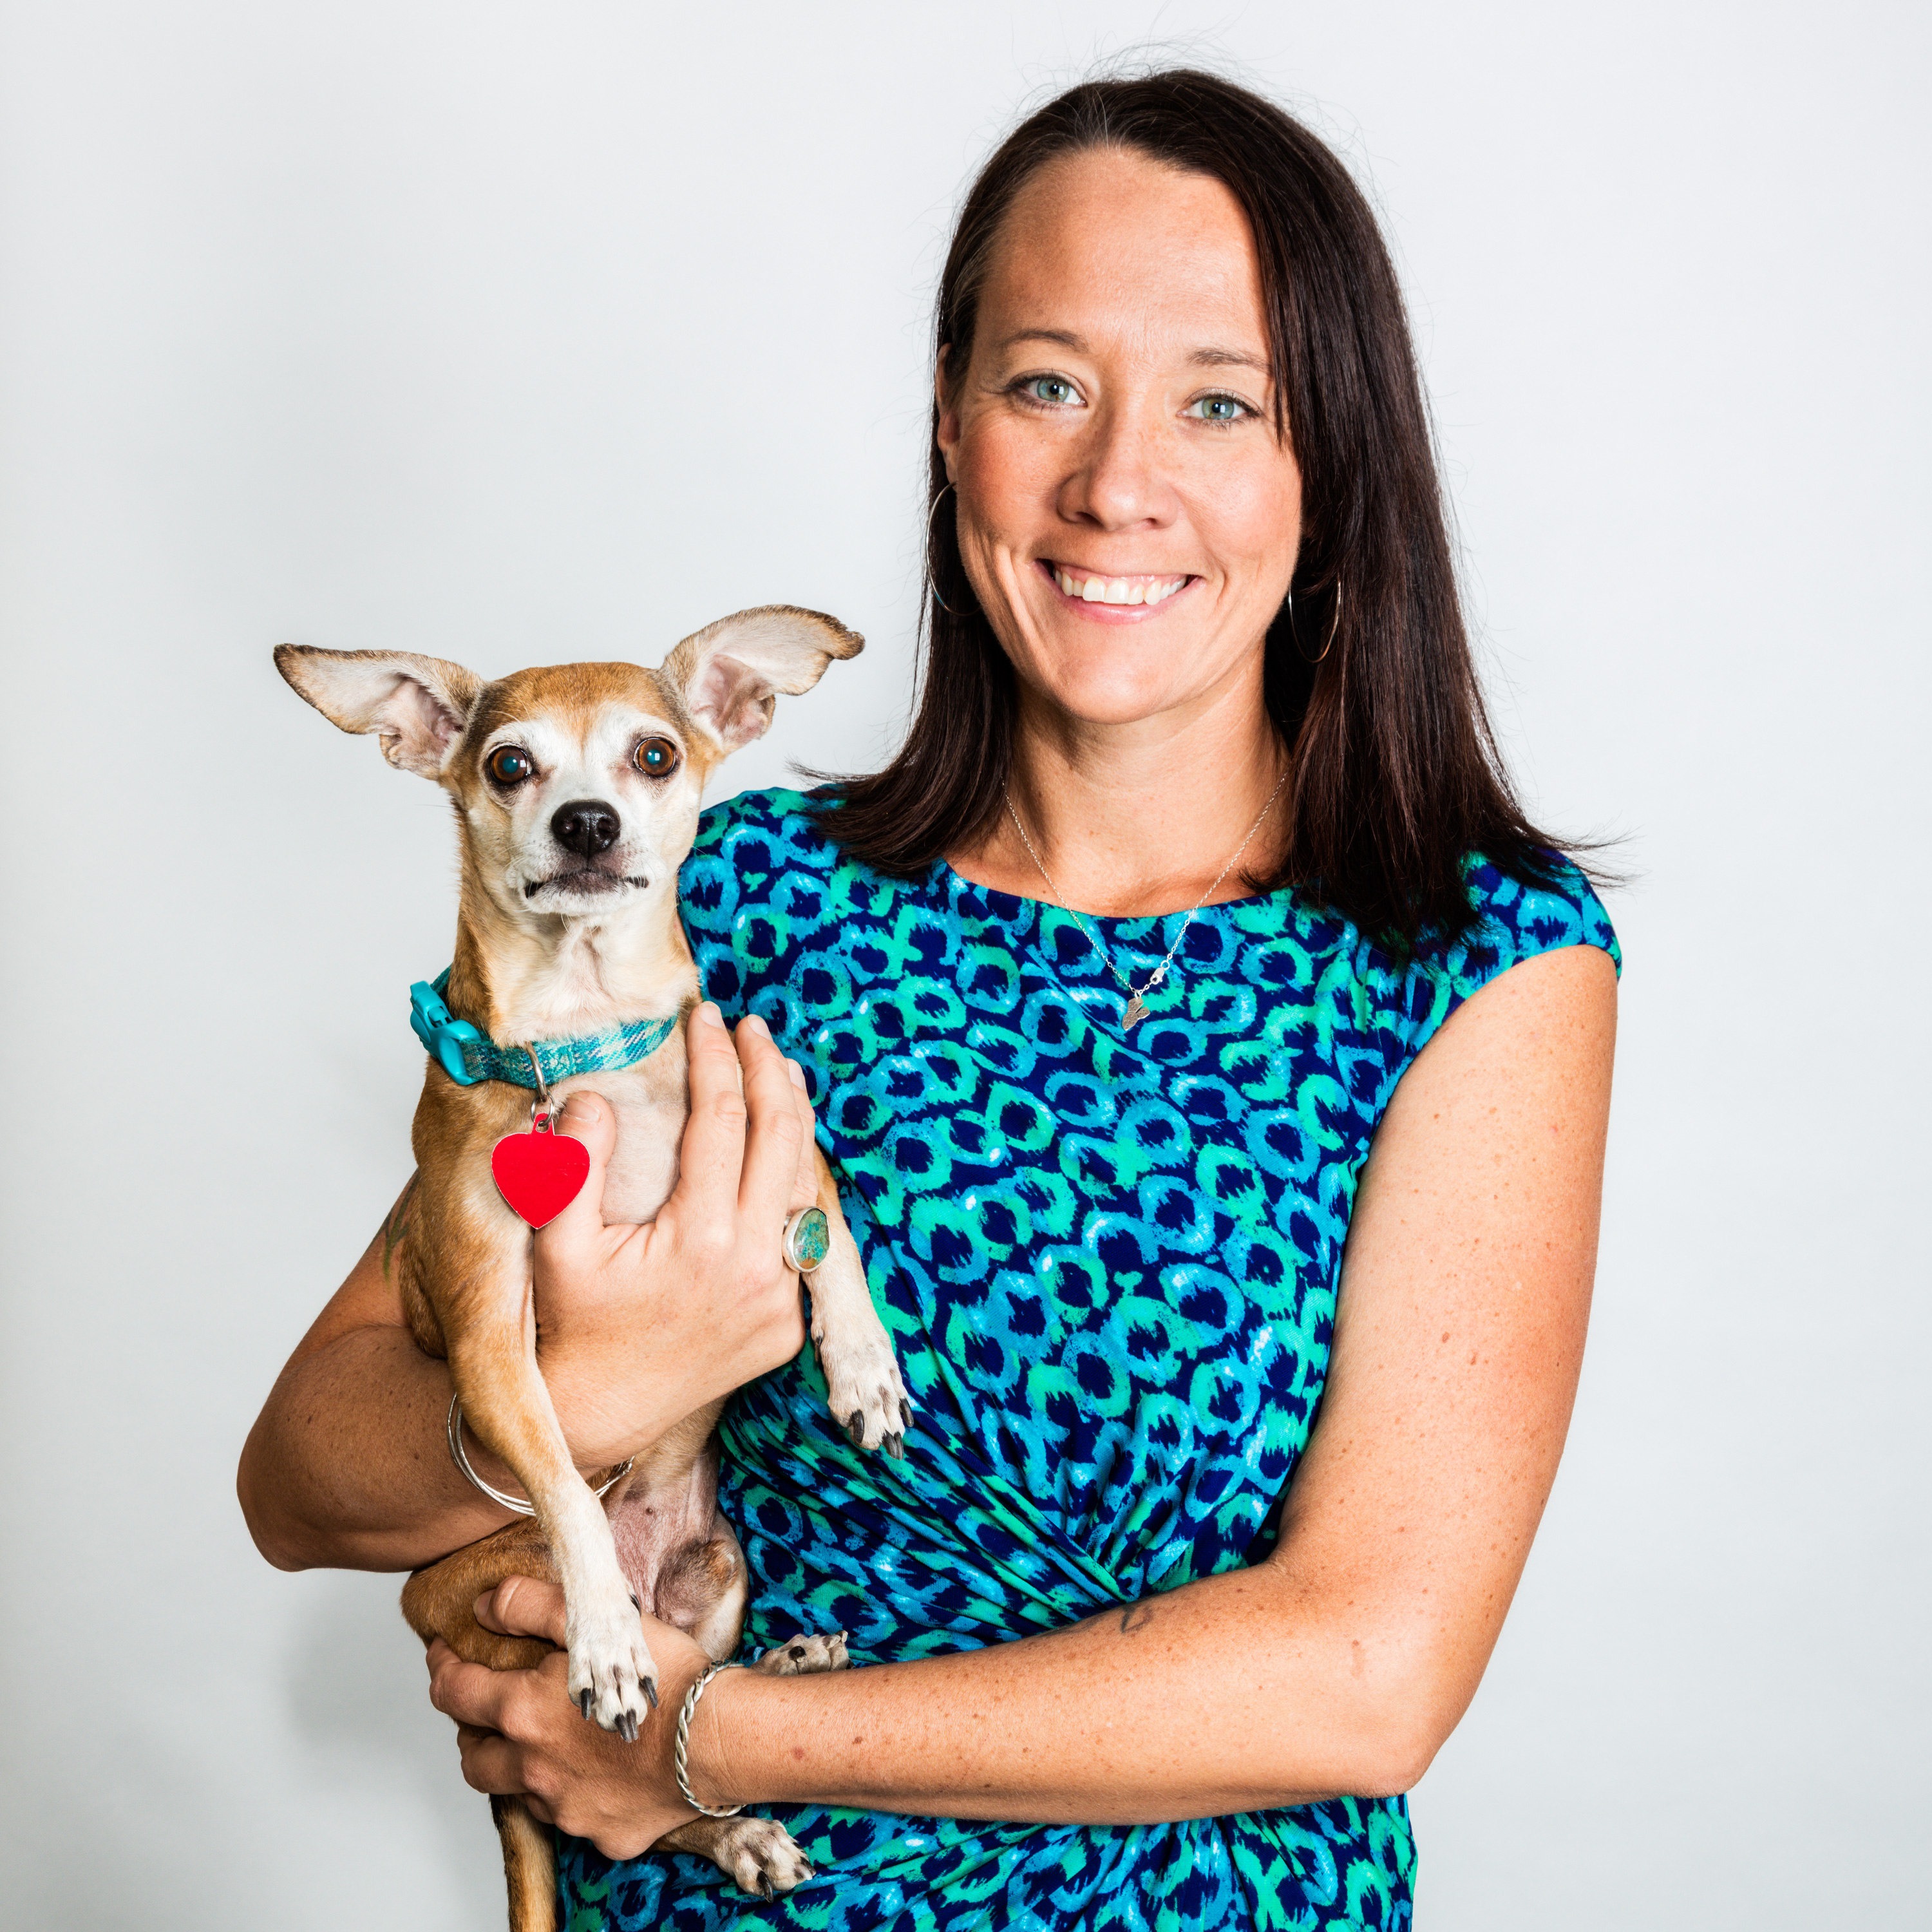 Bio photo of Kristen Auerbach, smiling in a patterned shirt as she holds a chihuahua